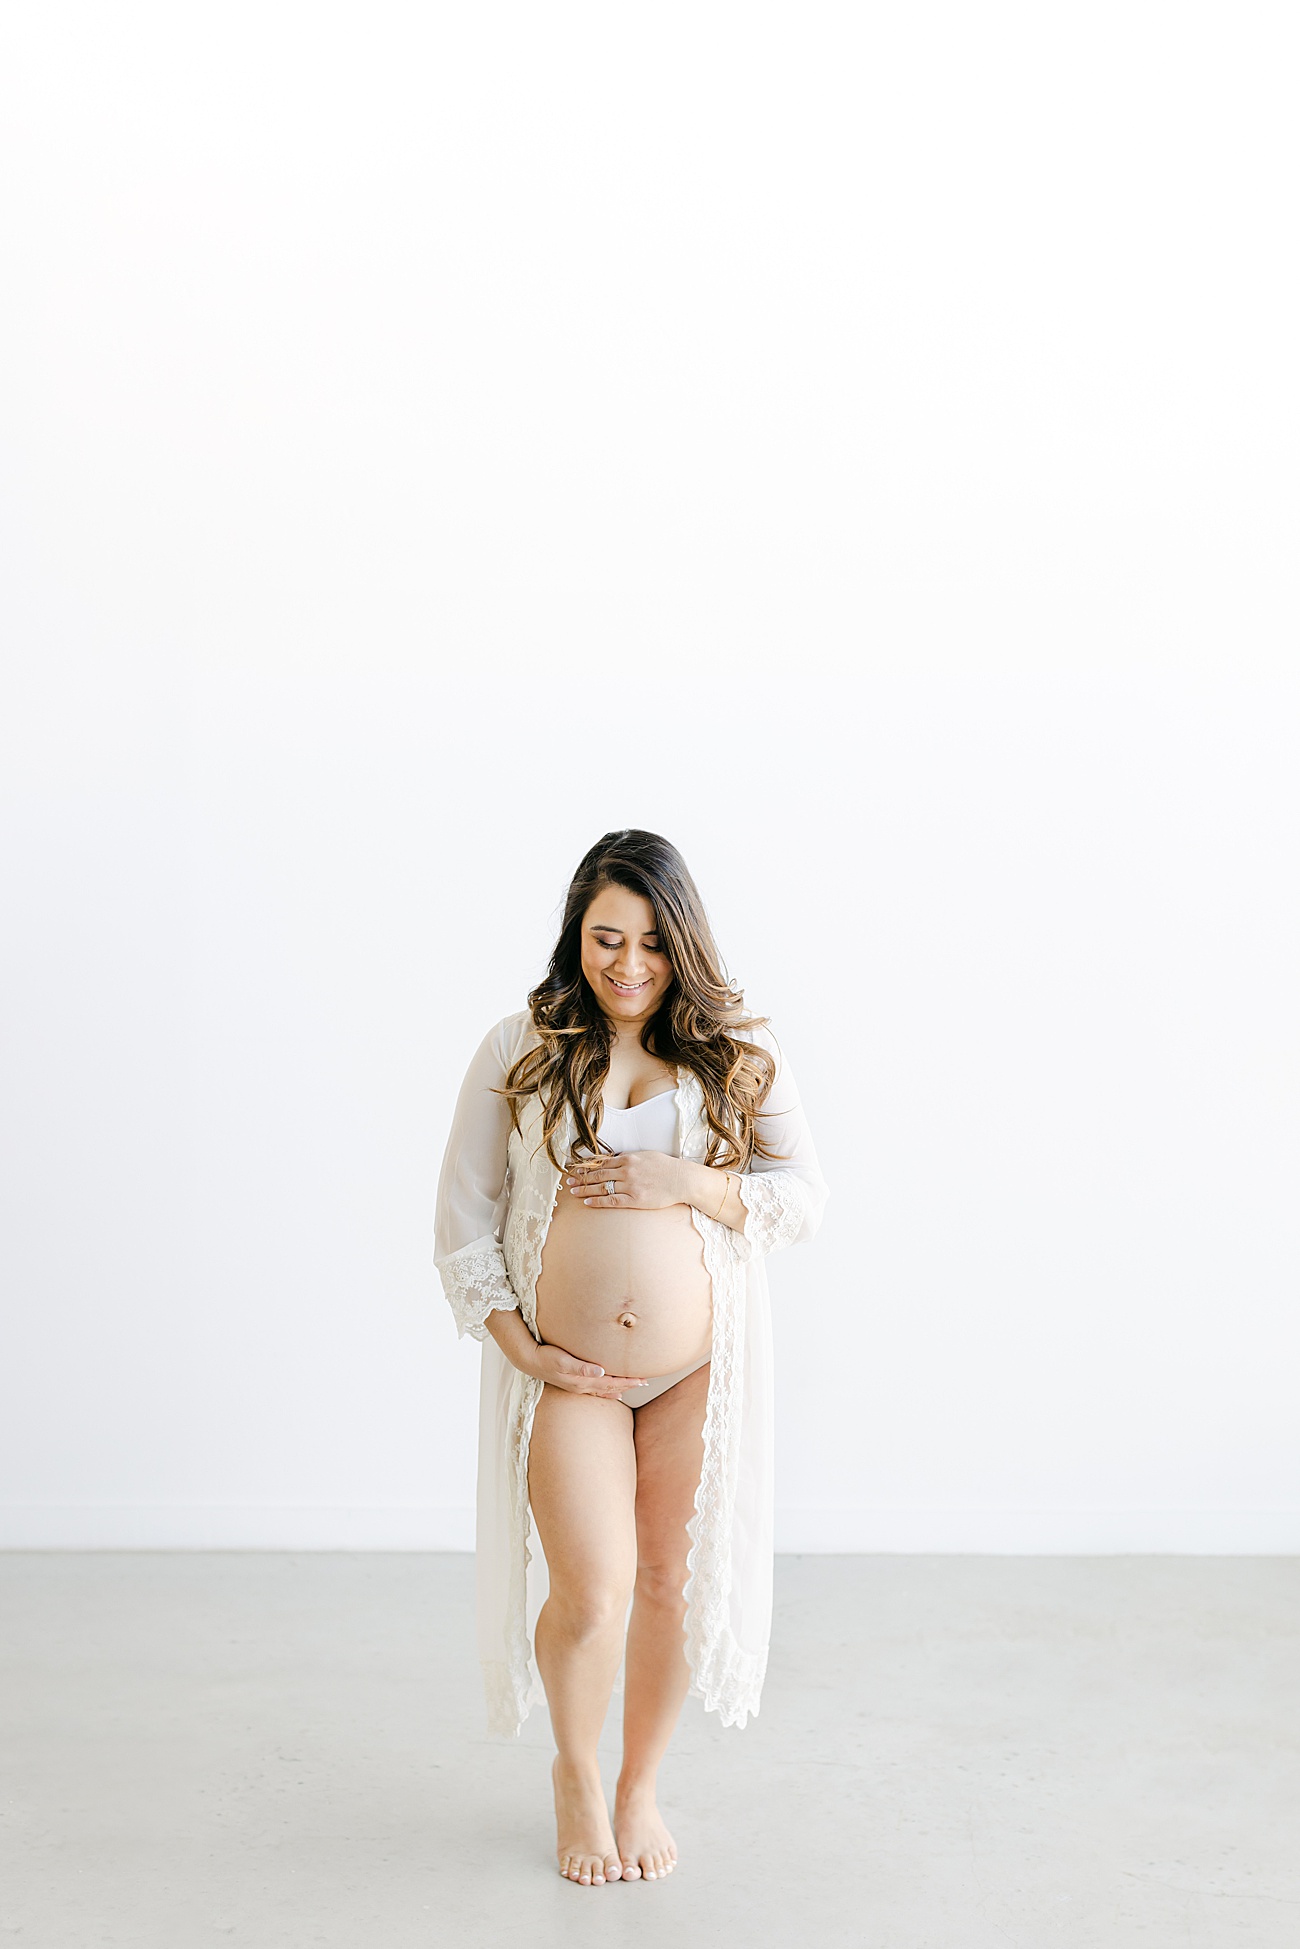 Intimate maternity portrait with Mom in white lace robe. Photo by Sana Ahmed Photography.